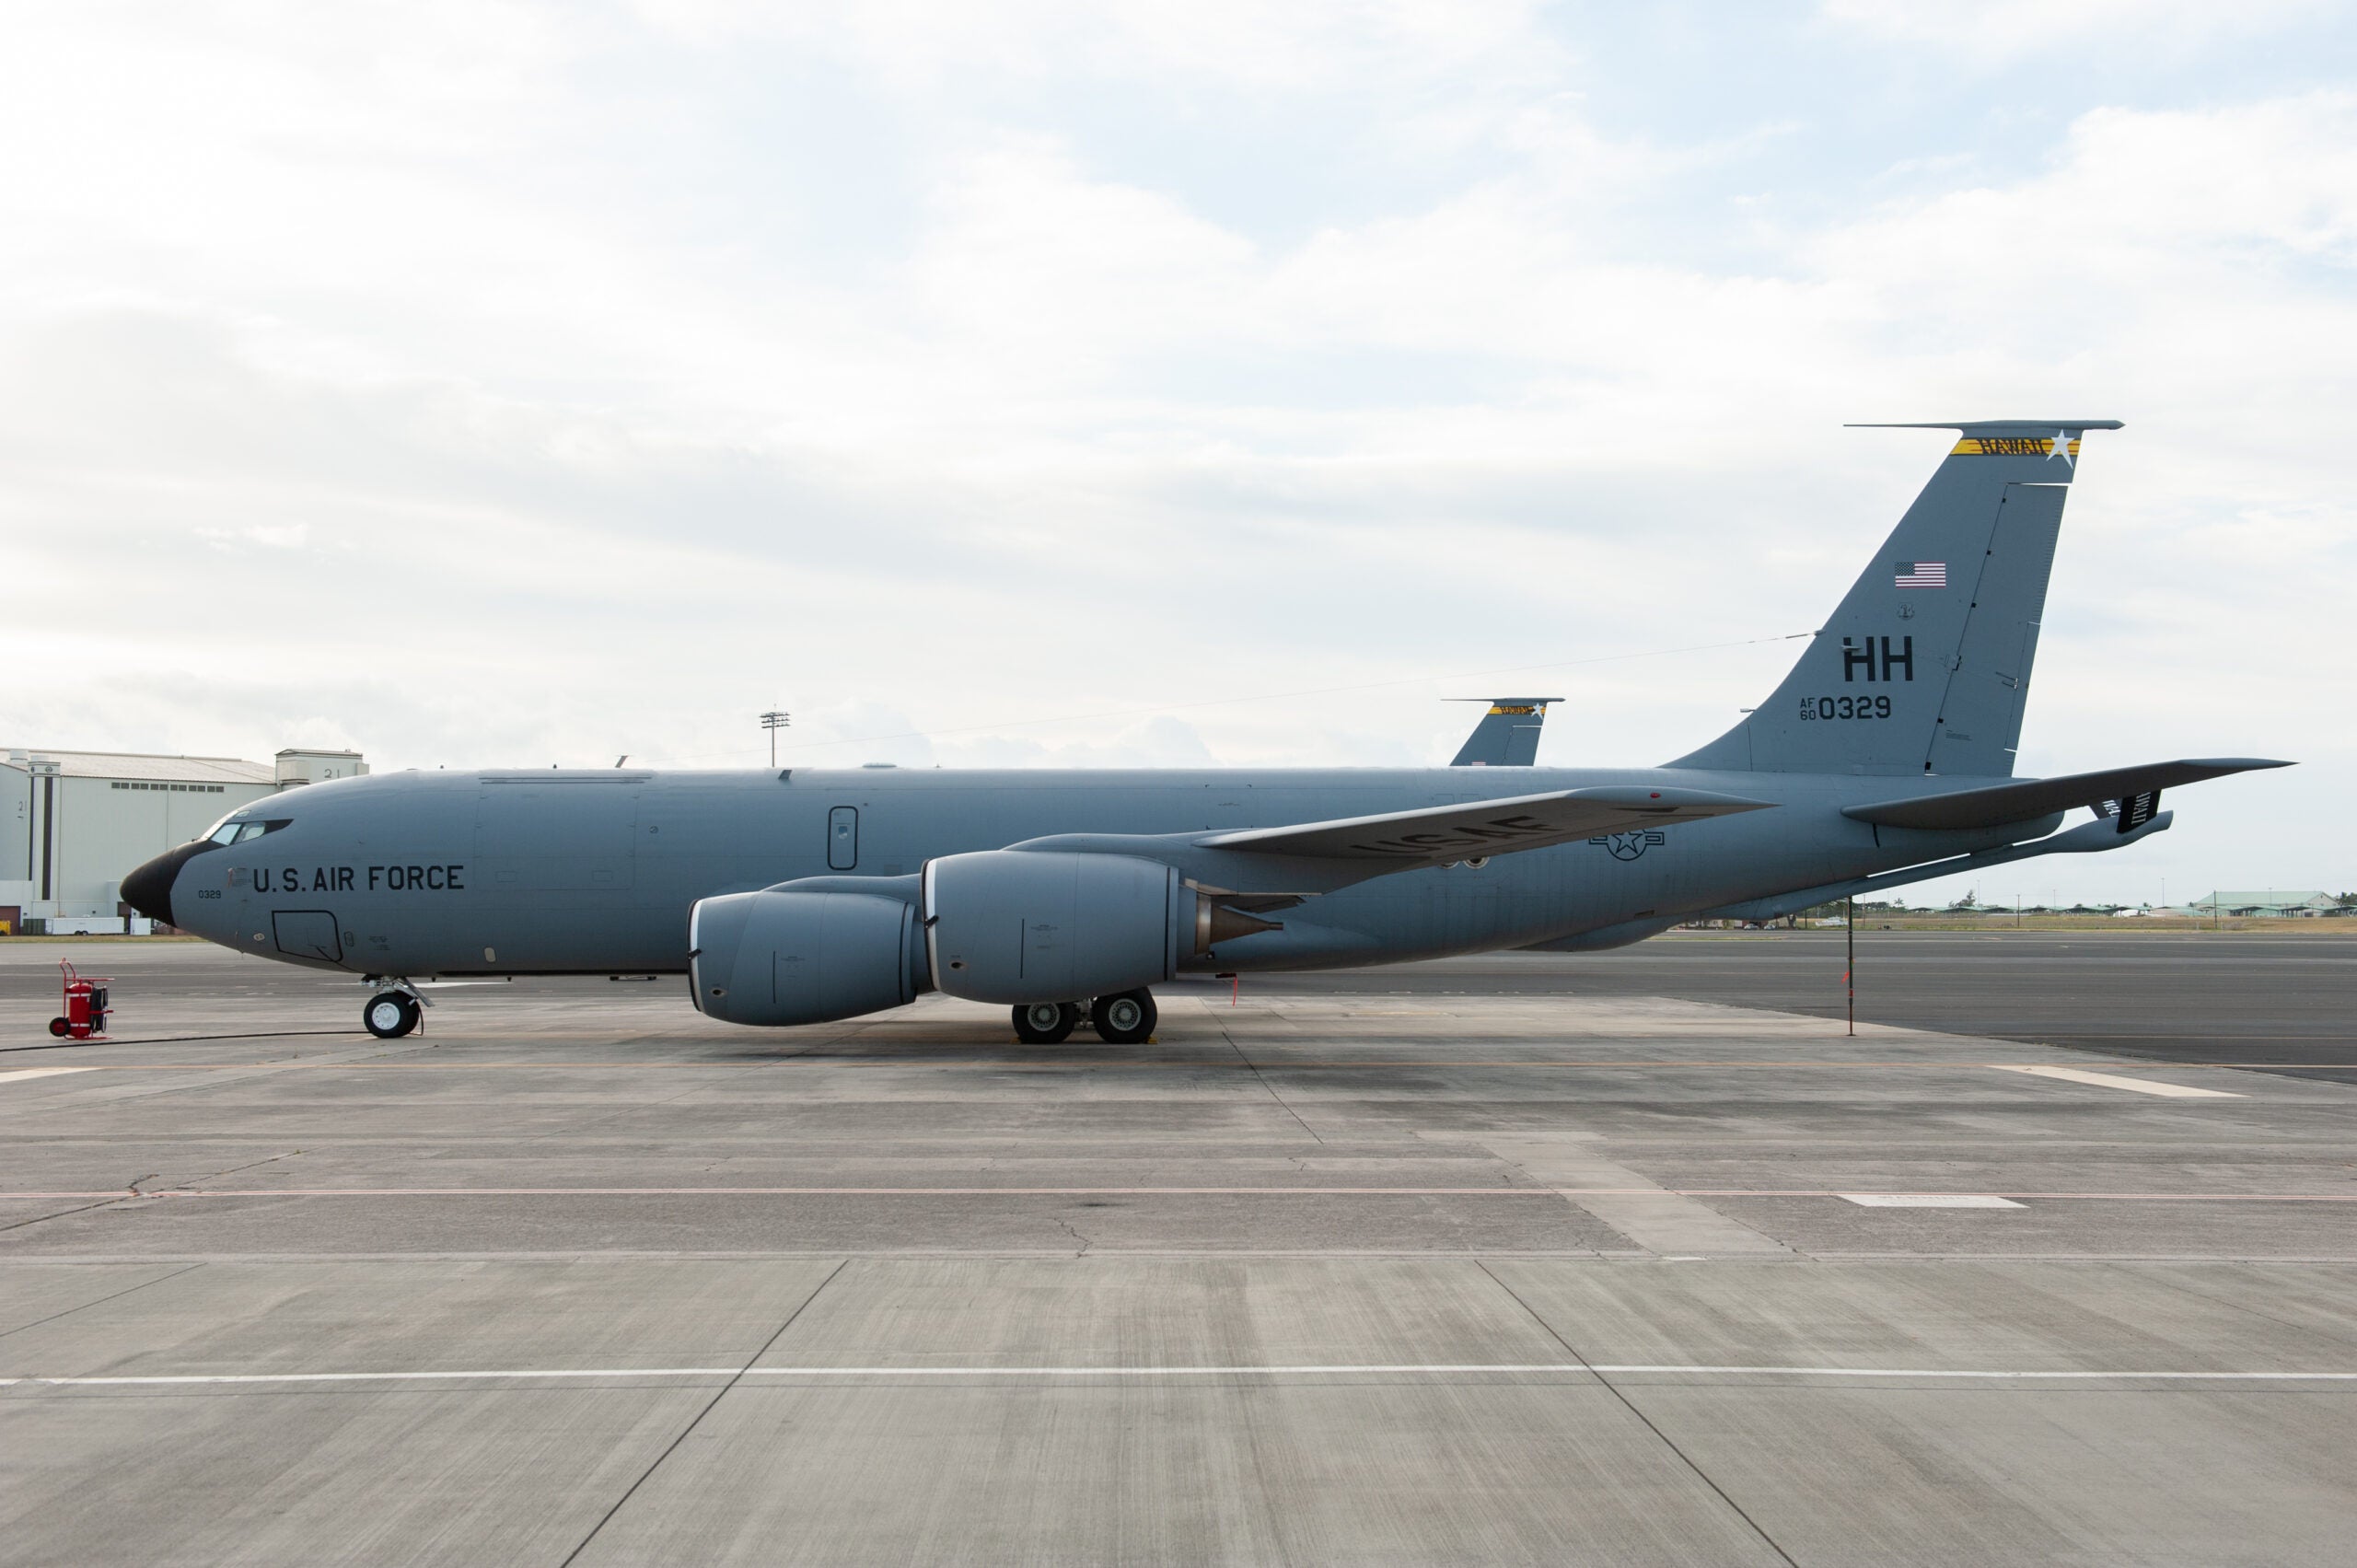 National Museum of U.S. Air Force To Add Iconic KC-135 To Collection